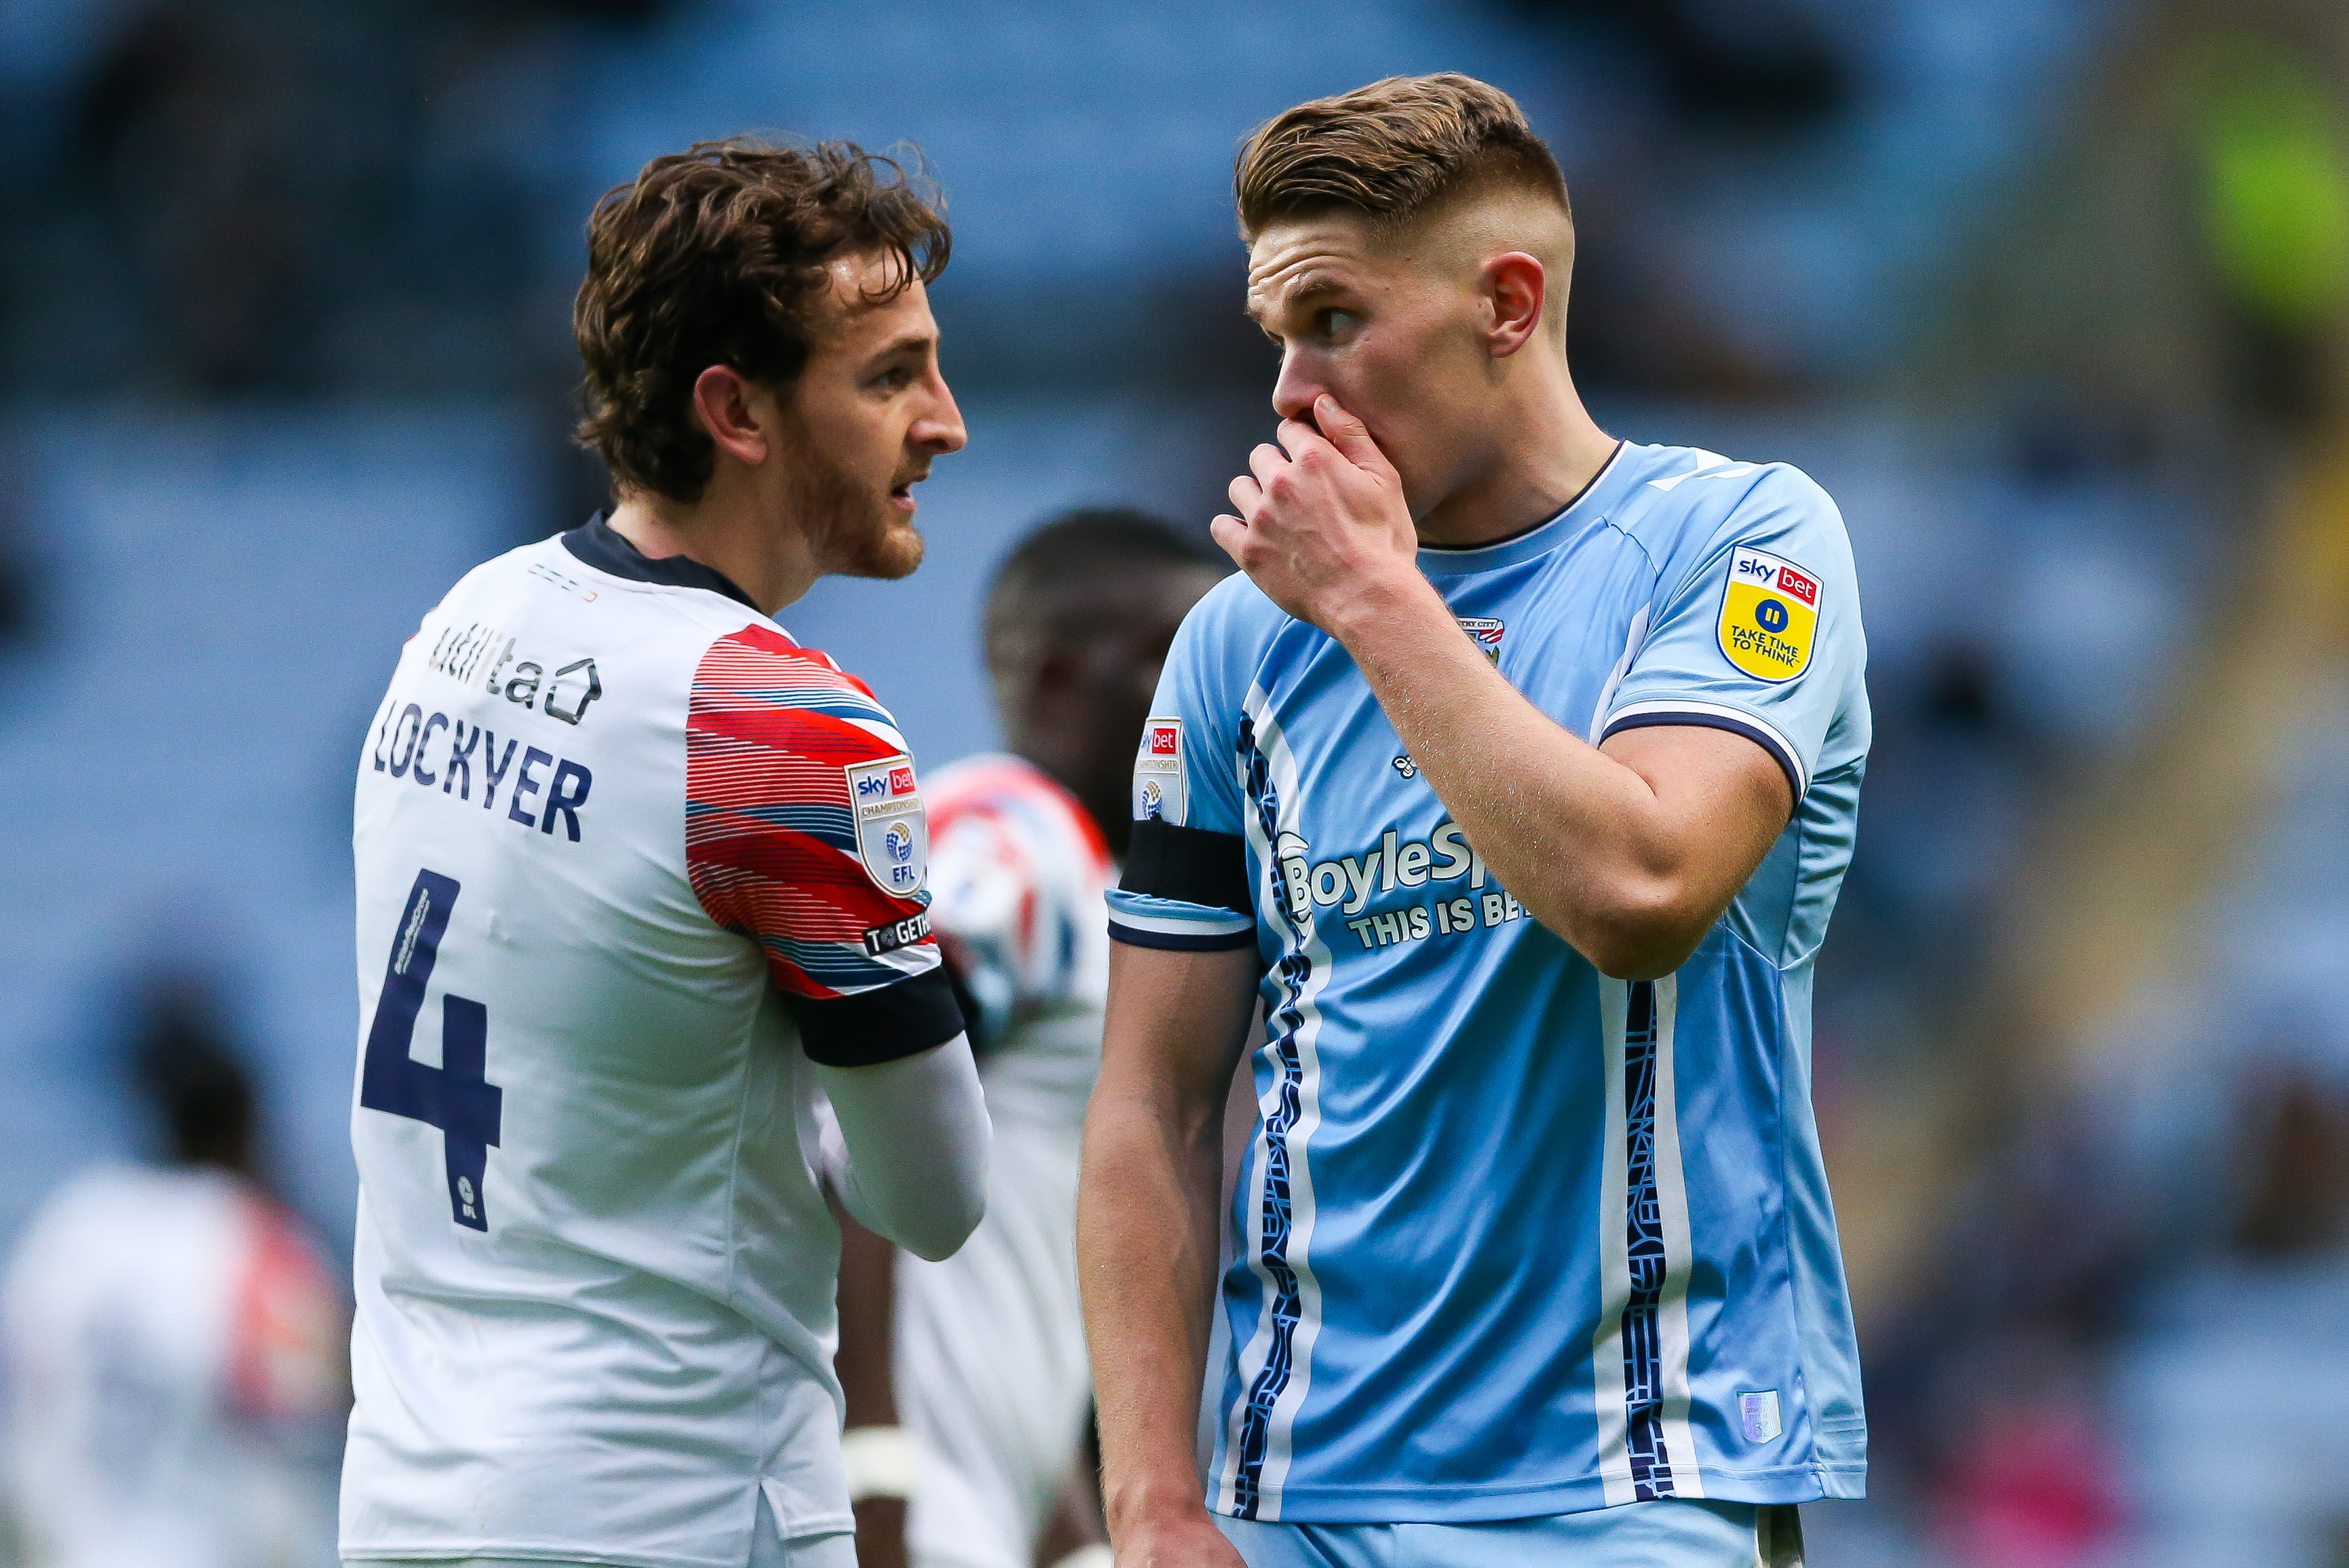 Coventry City v Luton Town - Sky Bet Championship - Coventry Building Society Arena